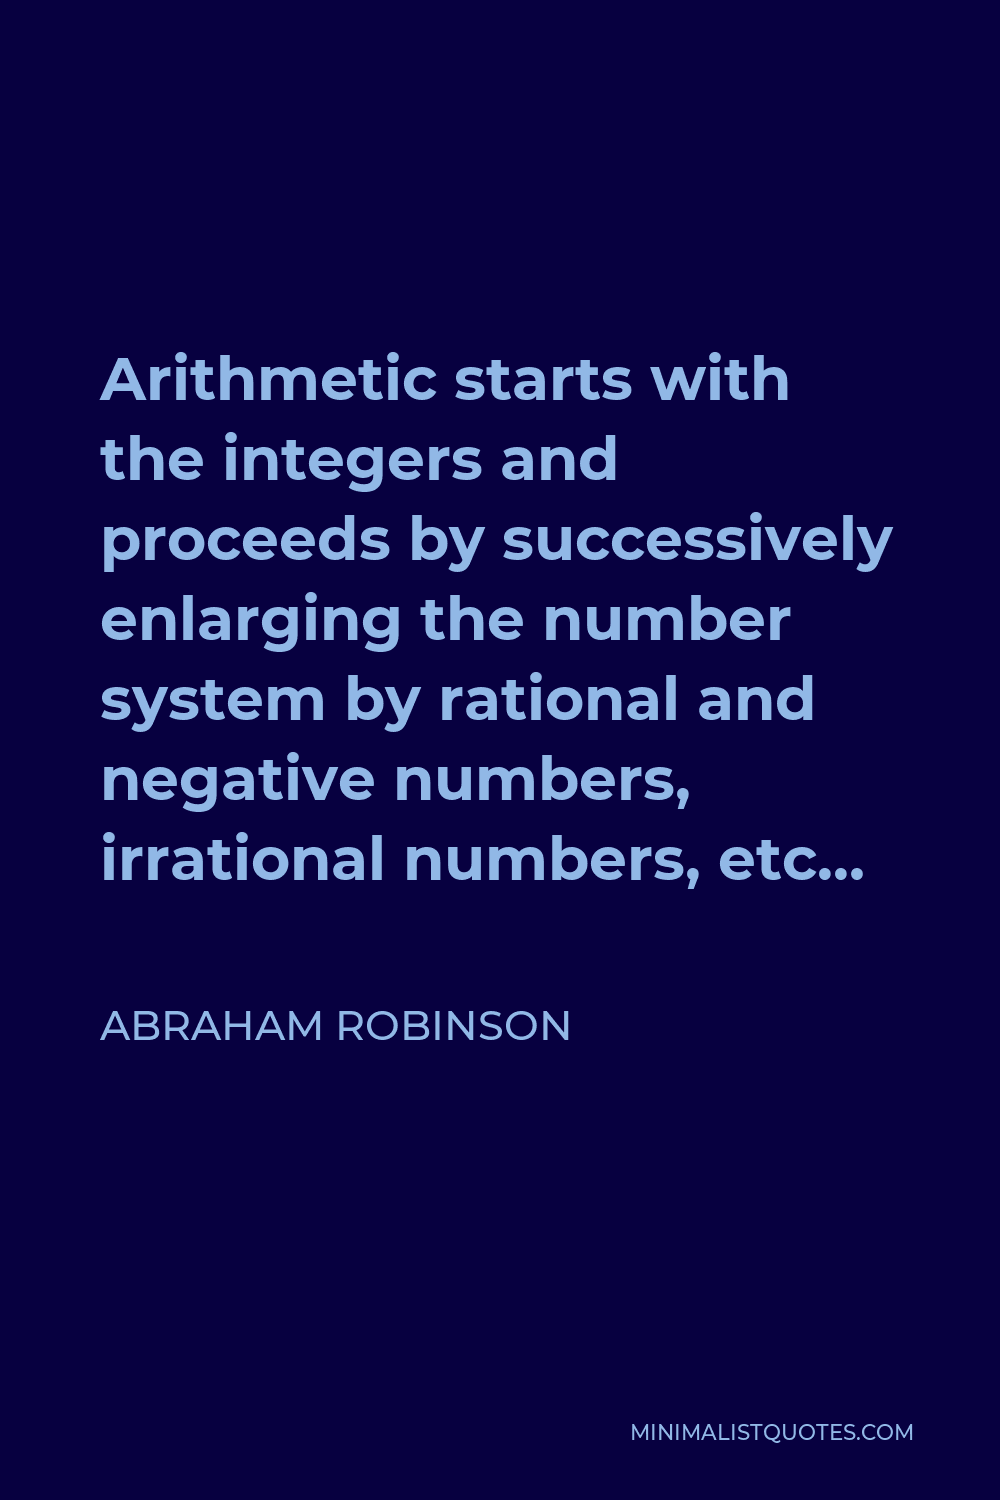 Abraham Robinson Quote - Arithmetic starts with the integers and proceeds by successively enlarging the number system by rational and negative numbers, irrational numbers, etc…